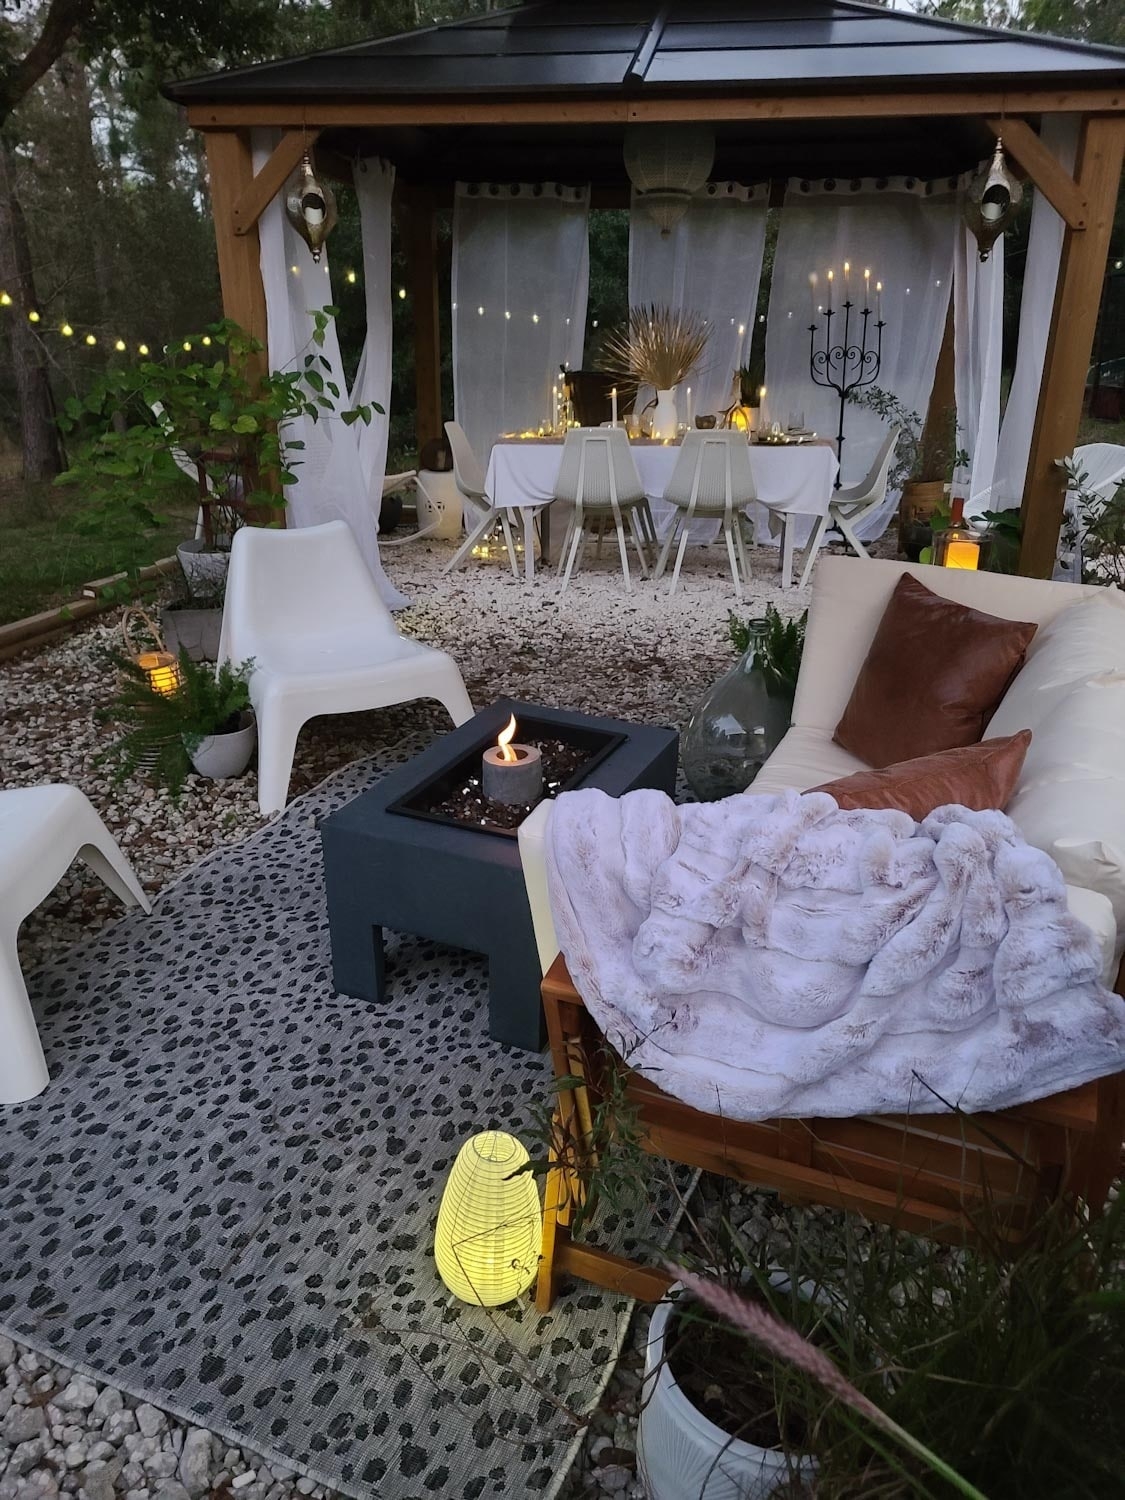 Outdoor dining space with fire pit, candles and lanterns. Twinkle lights, pillows and fur. Country living